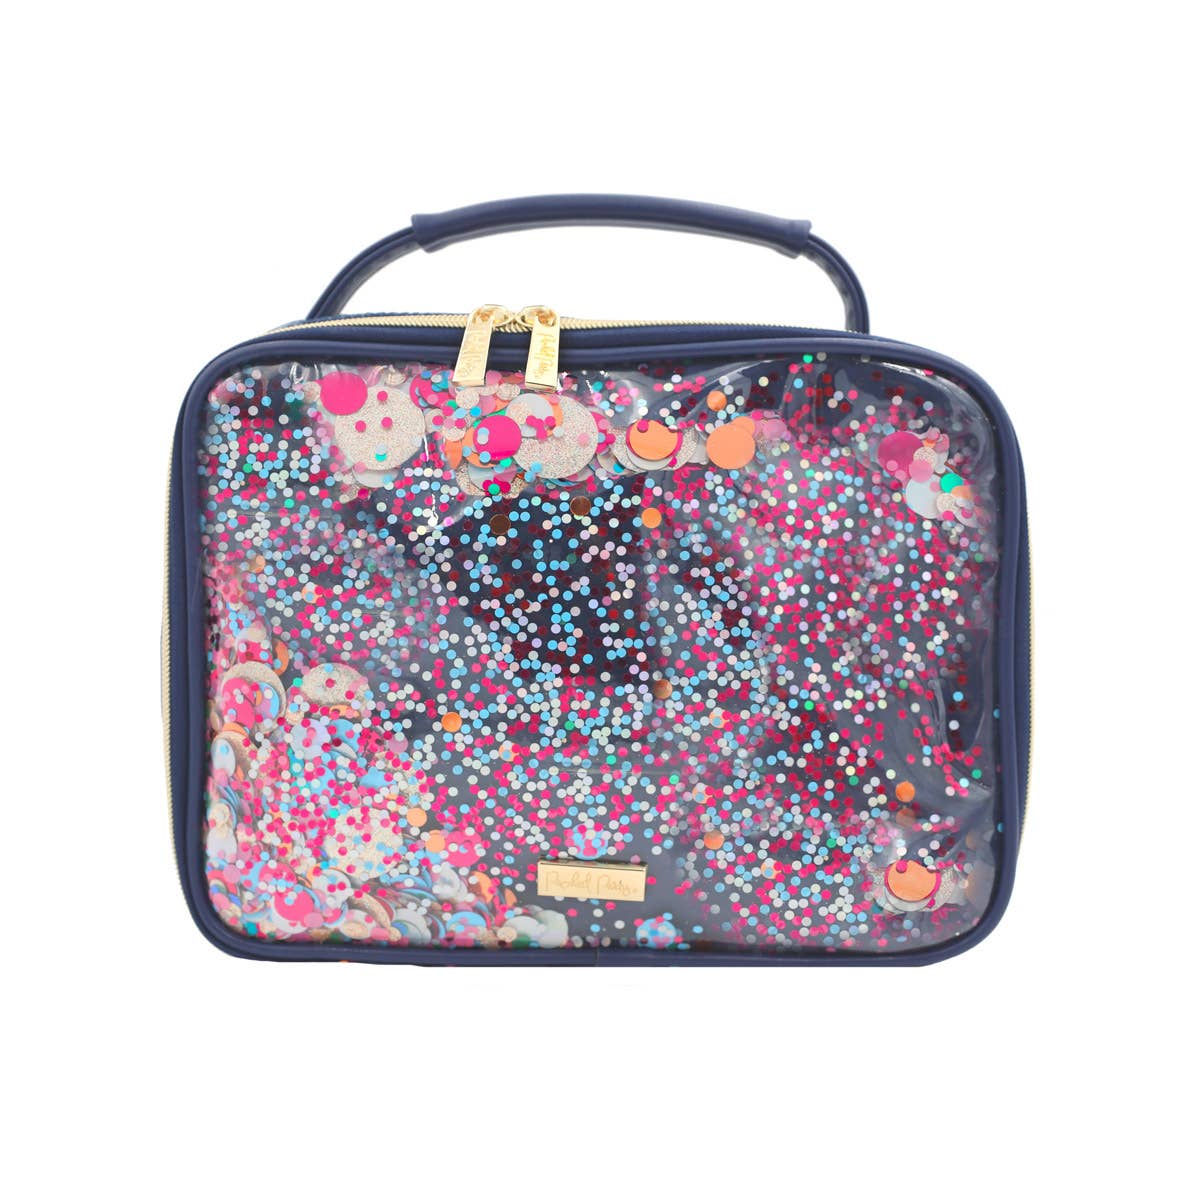 Essentials Confetti Insulated Lunch Box Cooler - Favorite Little Things Co